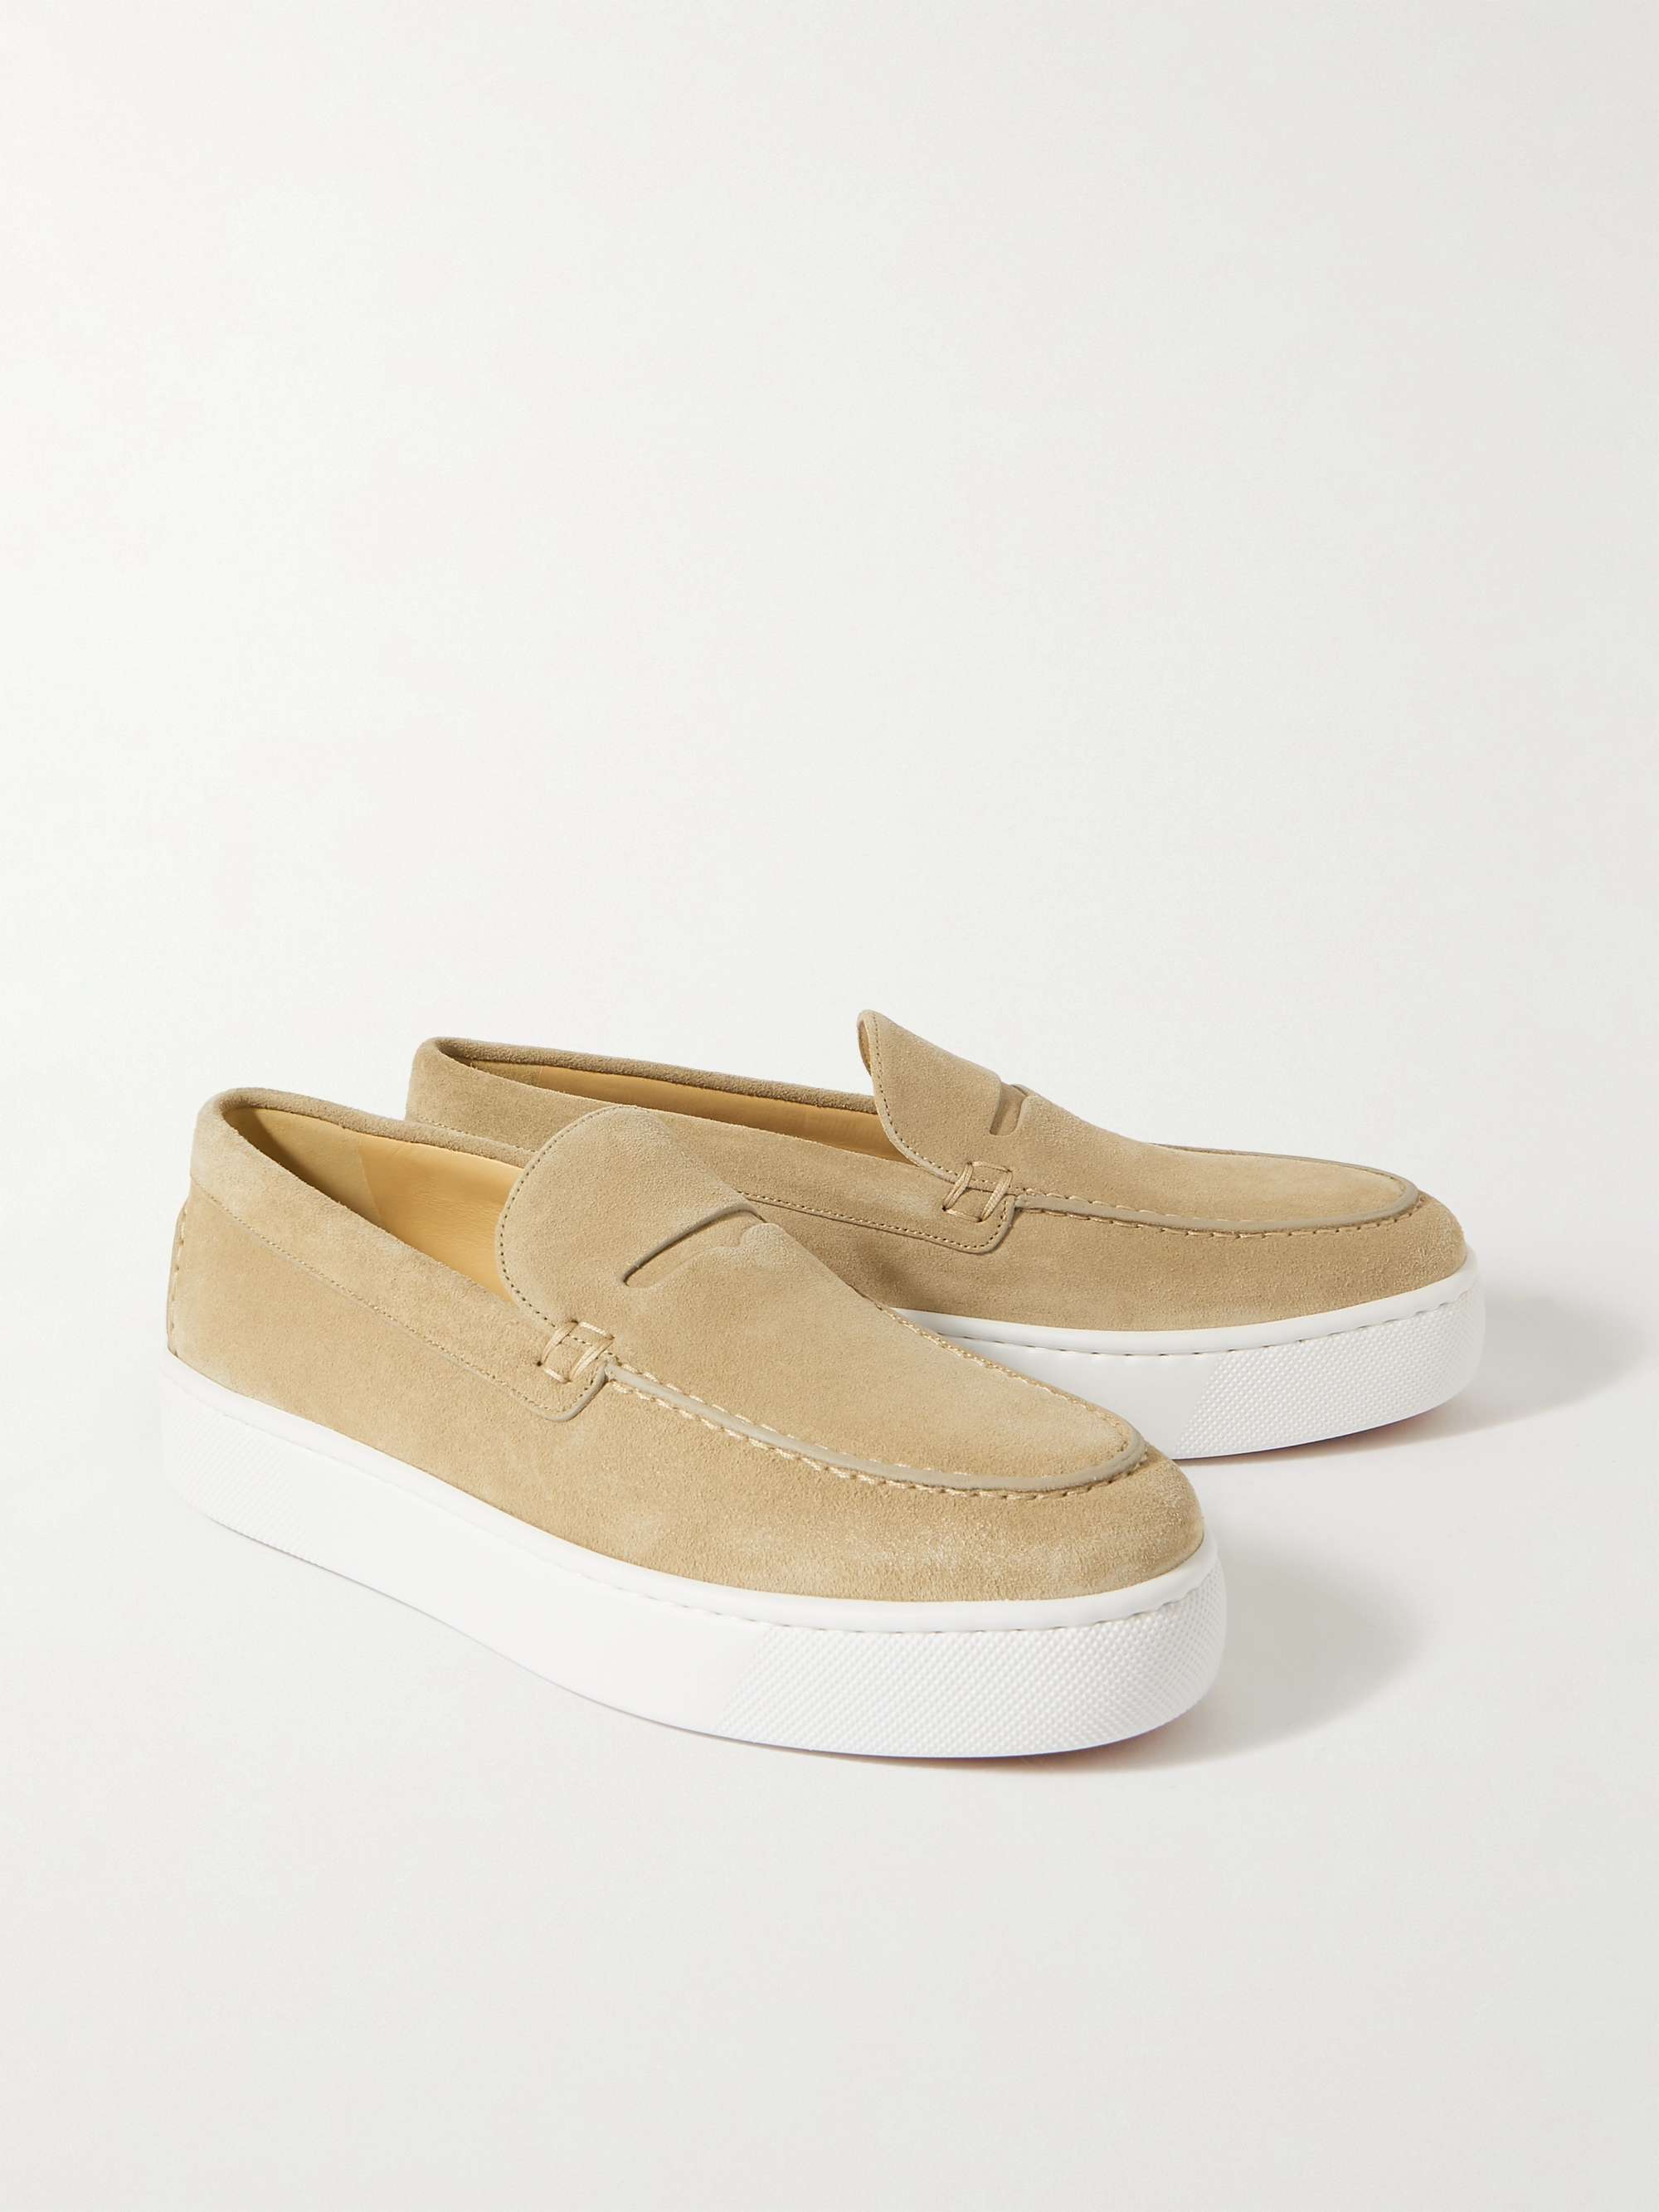 CHRISTIAN LOUBOUTIN Paqueboat Suede Boat Shoes